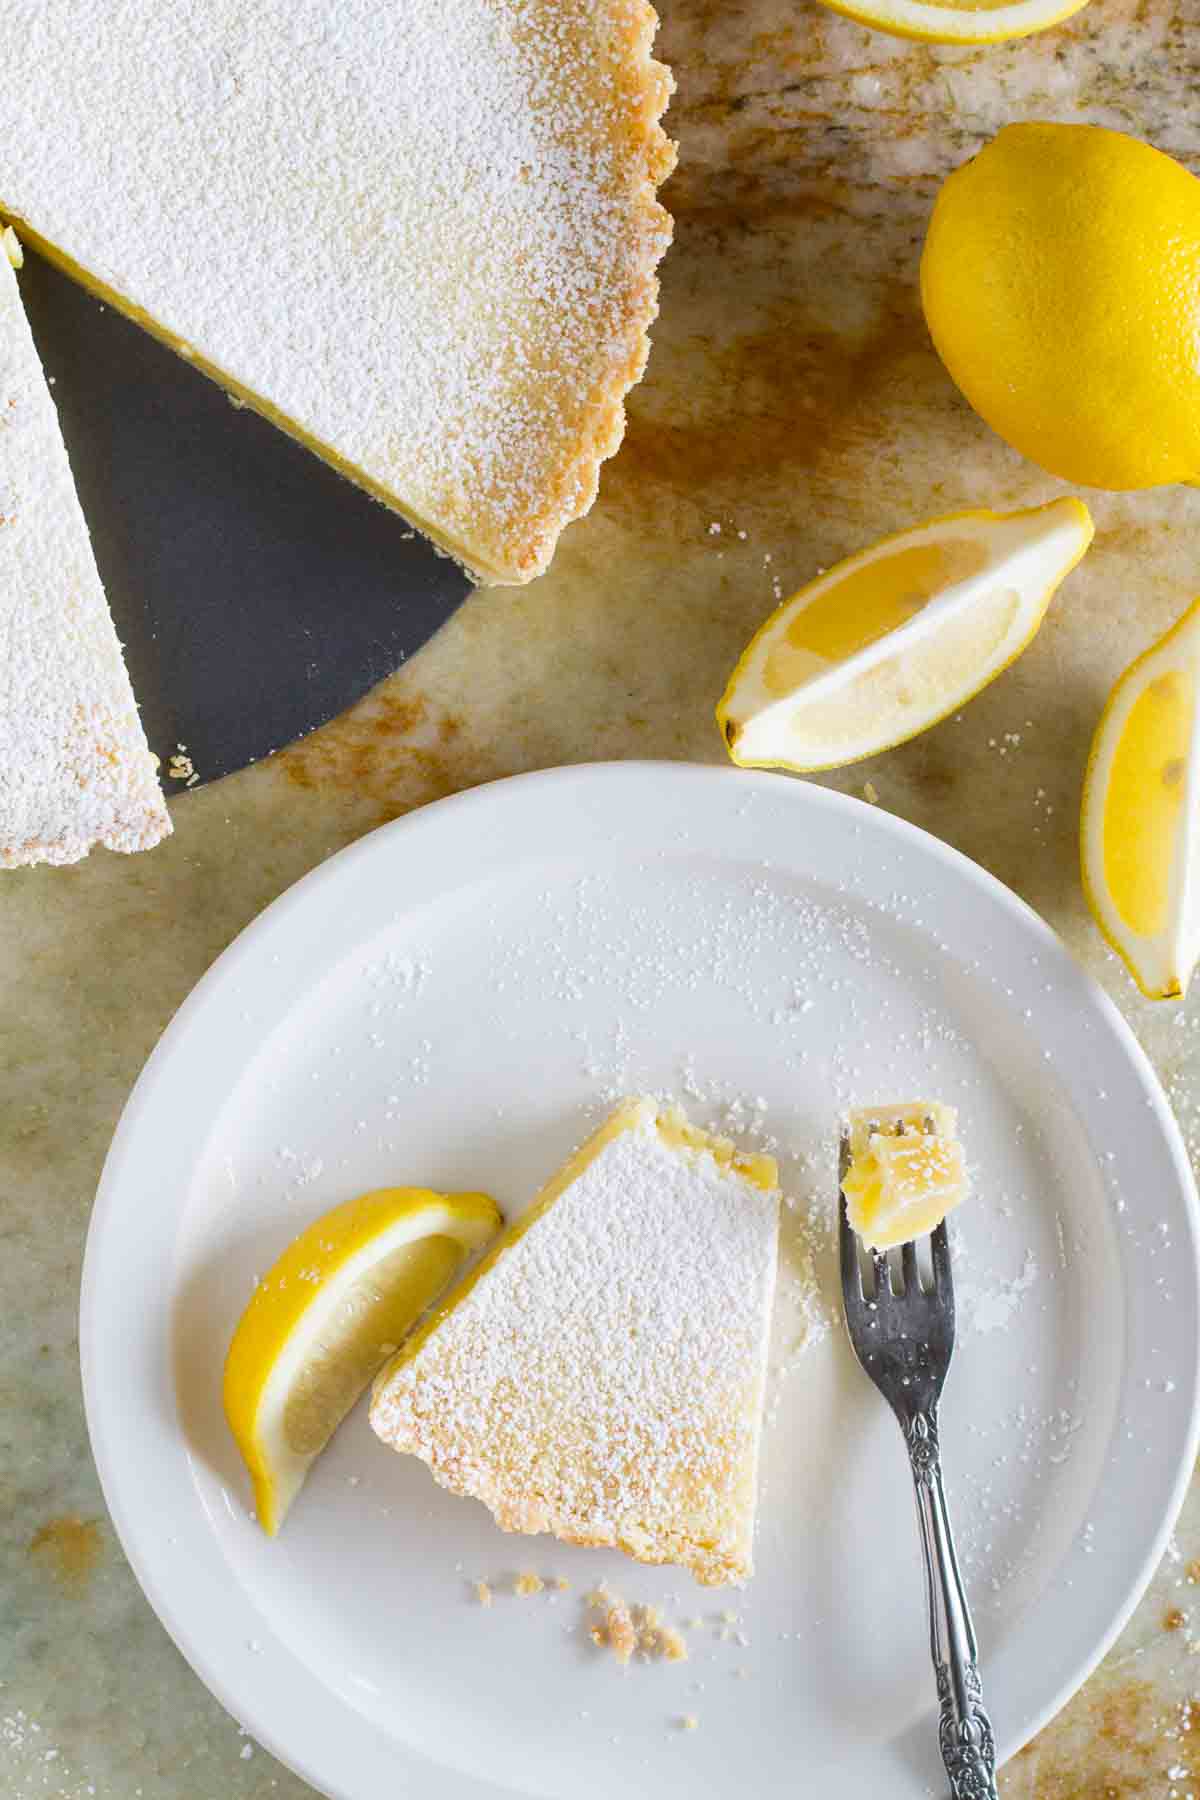 Overhead view of slice of shortbread lemon tart with a bite taken from it on a fork.